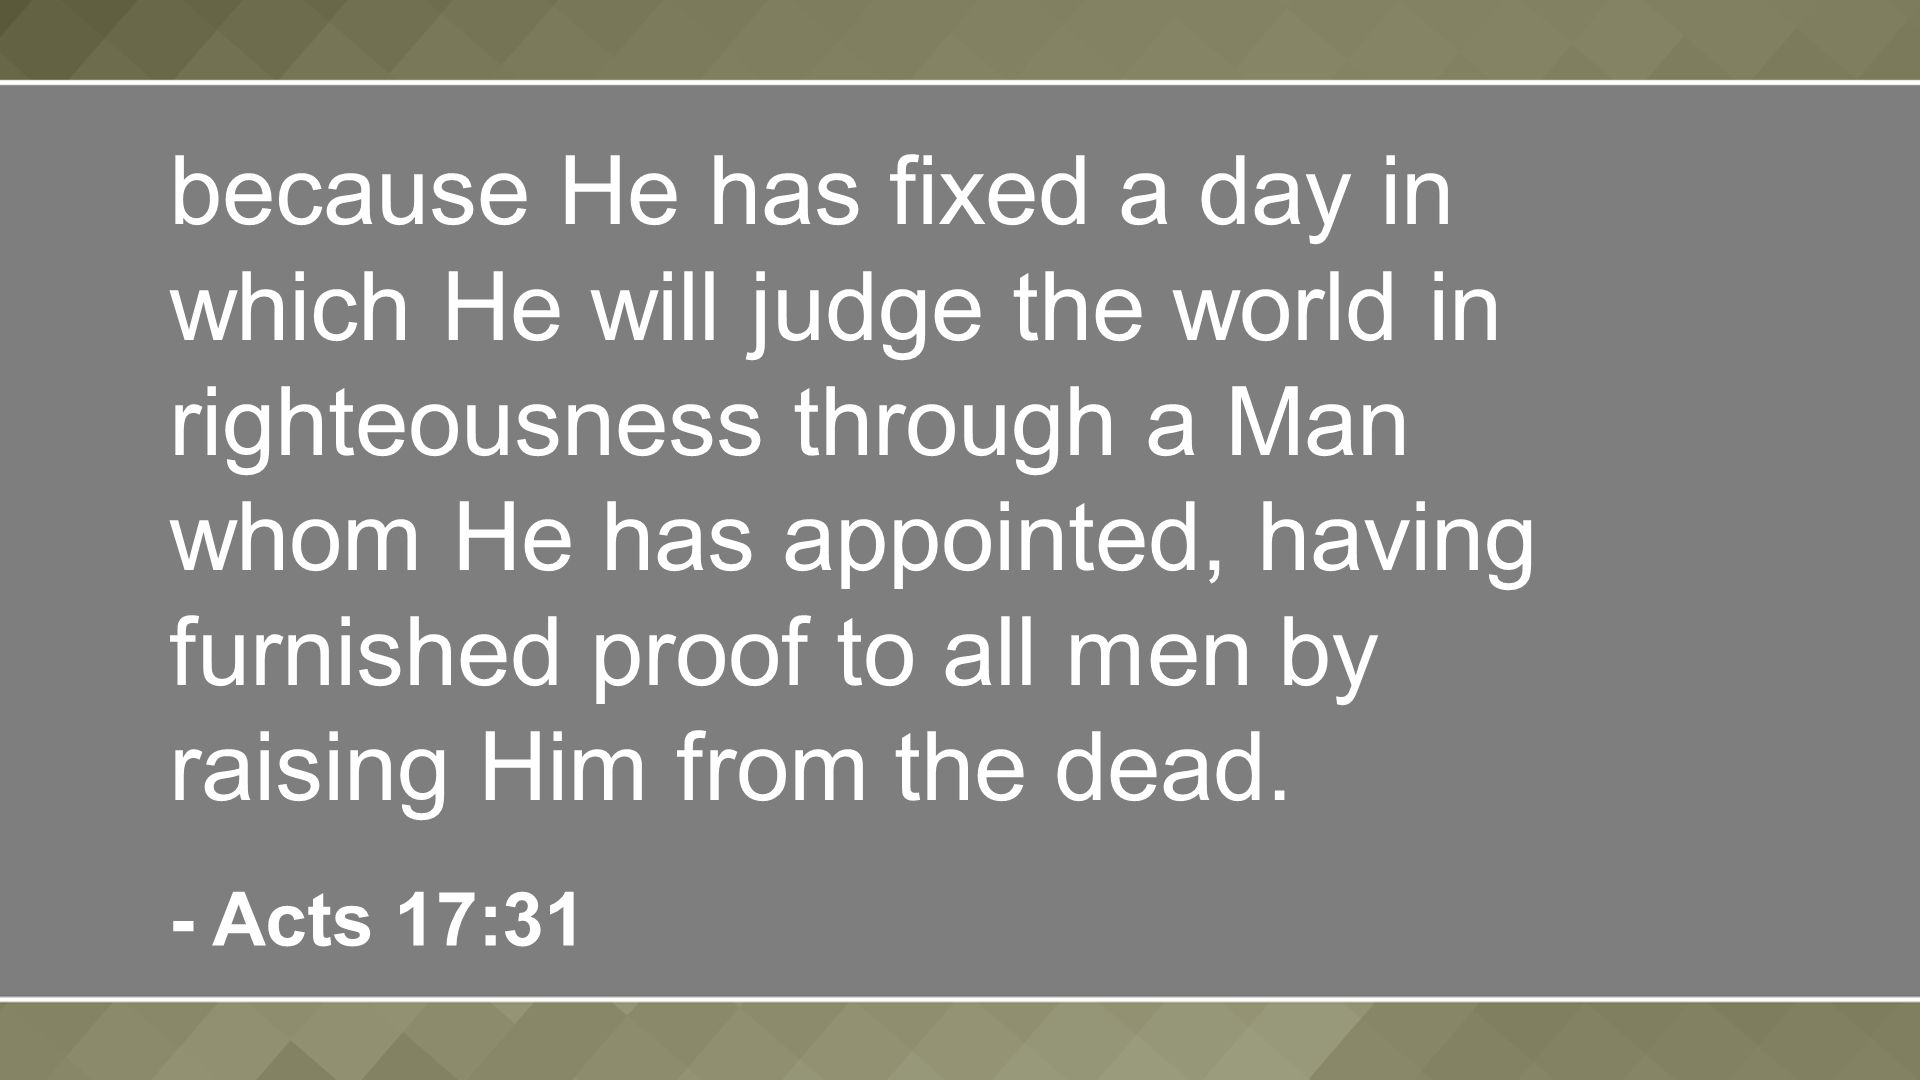 because He has fixed a day in which He will judge the world in righteousness through a Man whom He has appointed, having furnished proof to all men by raising Him from the dead.